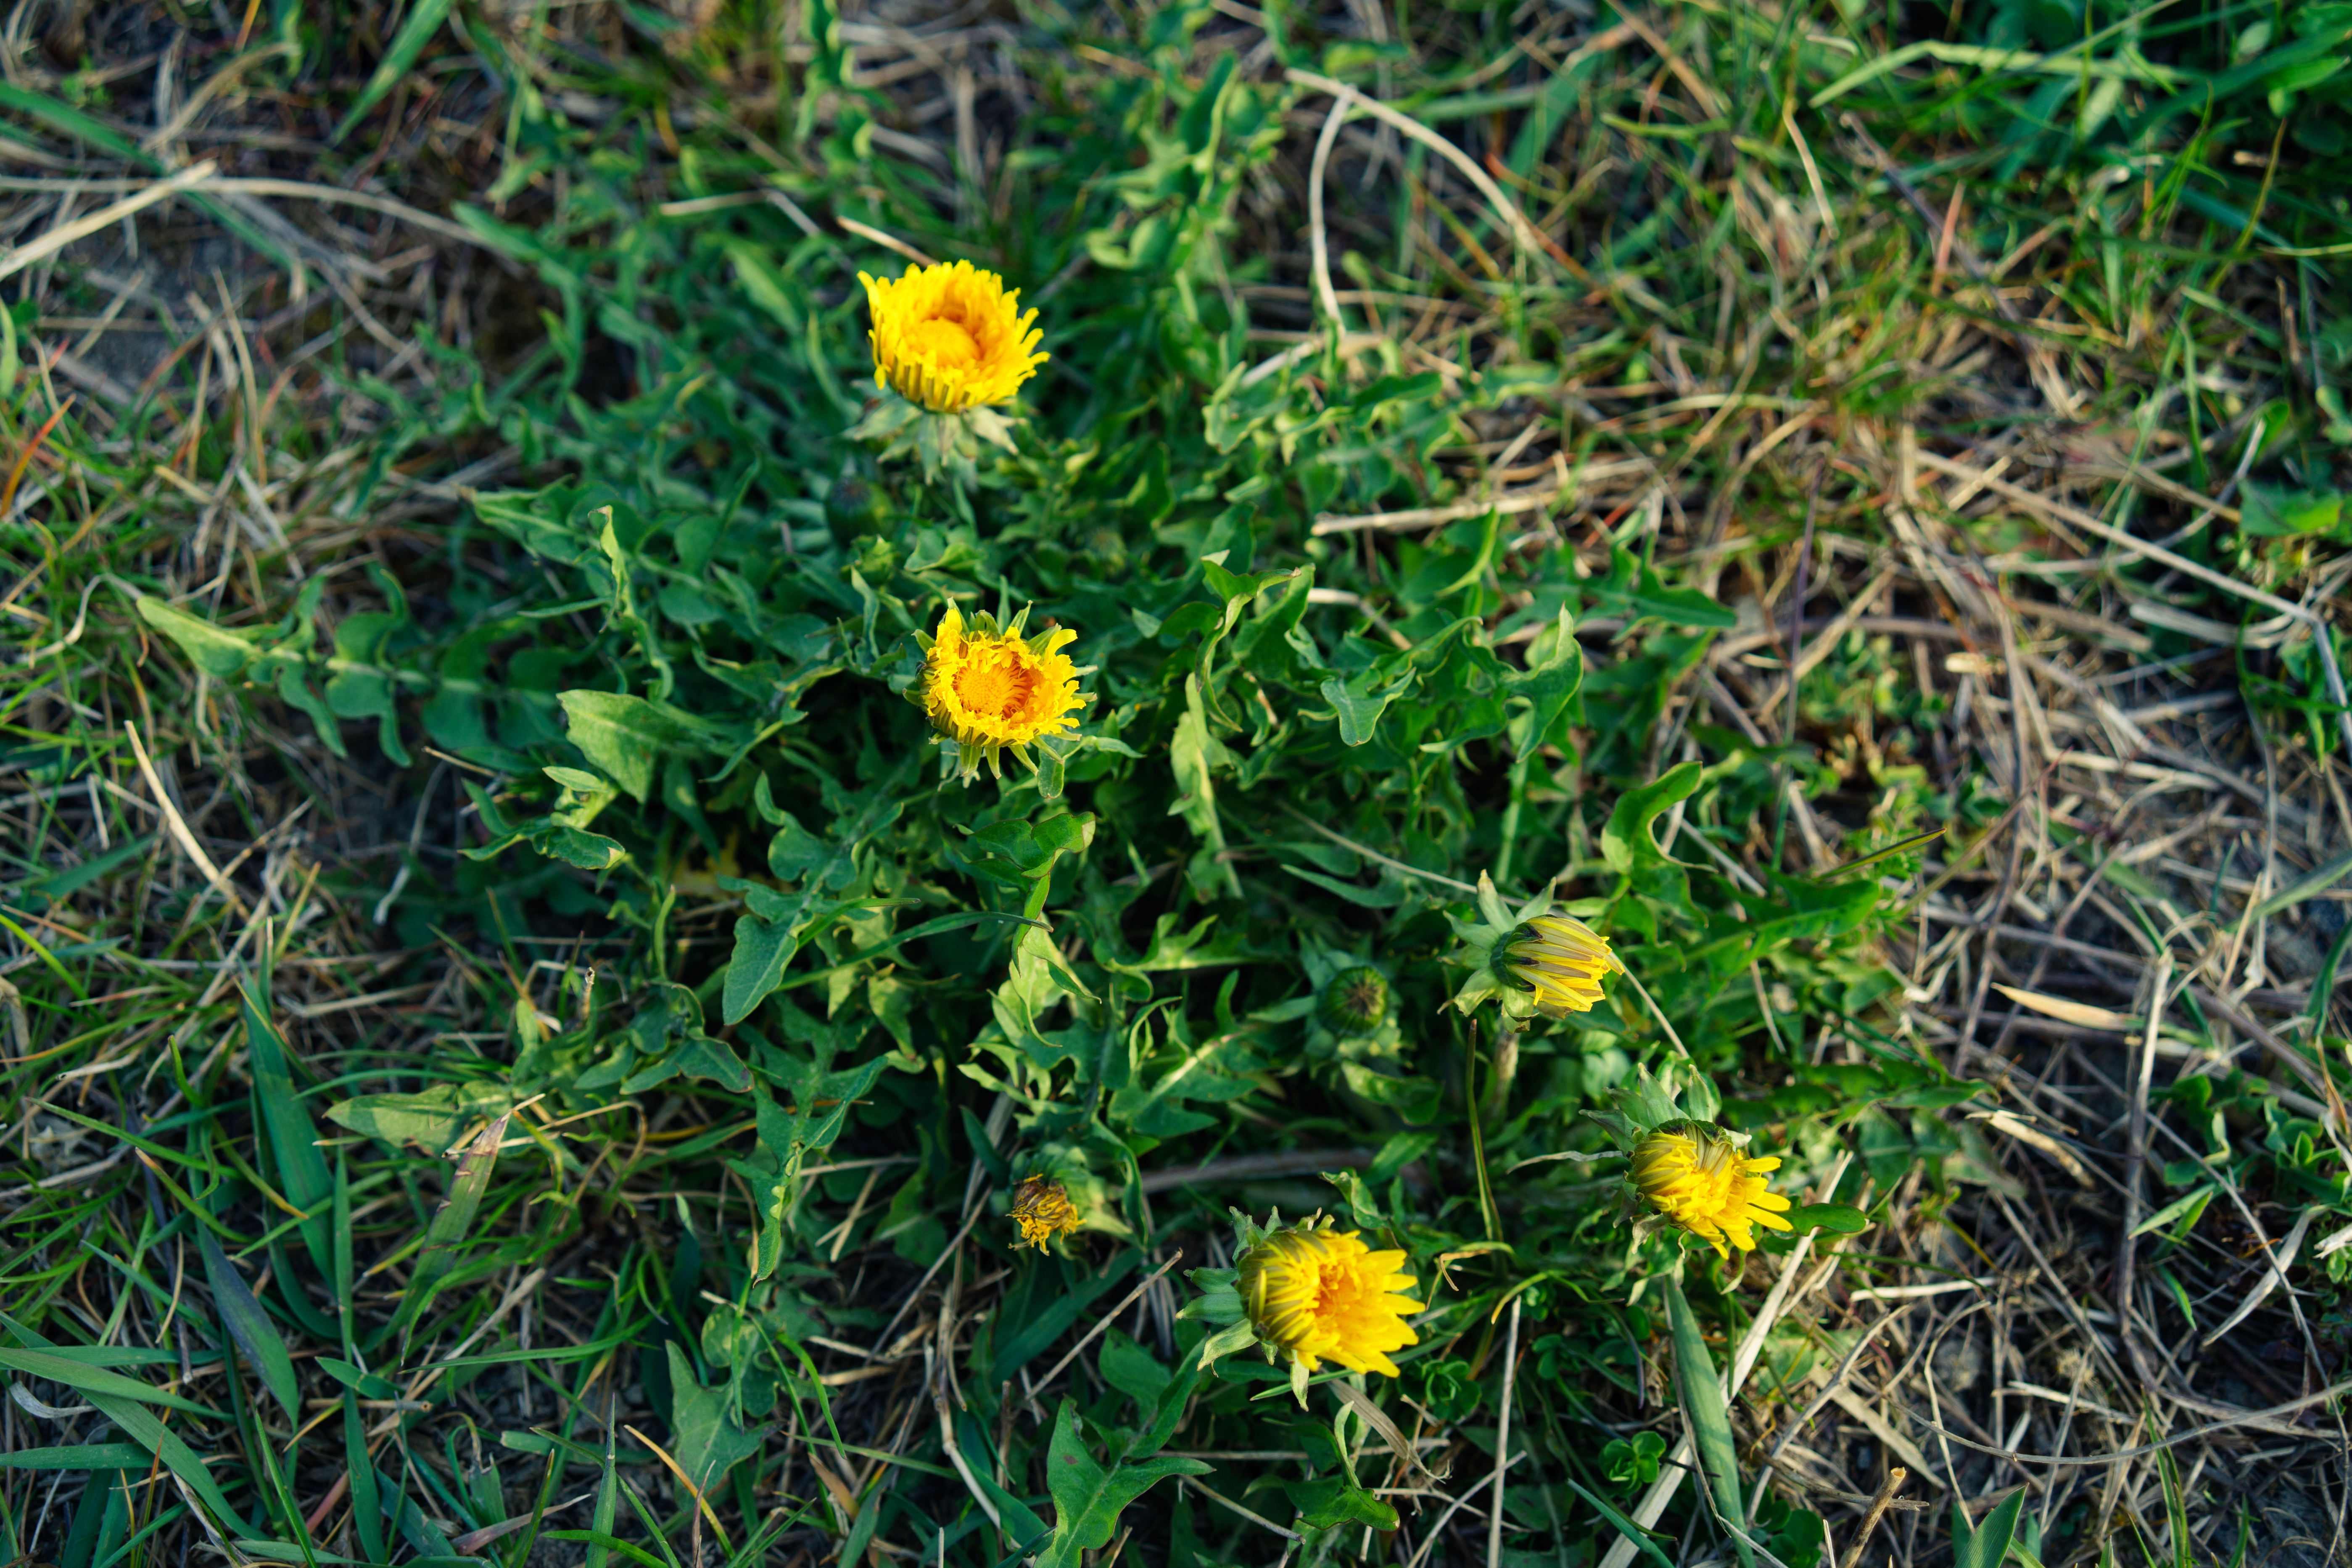 How To Identify & Kill These Annoying Lawn Weeds